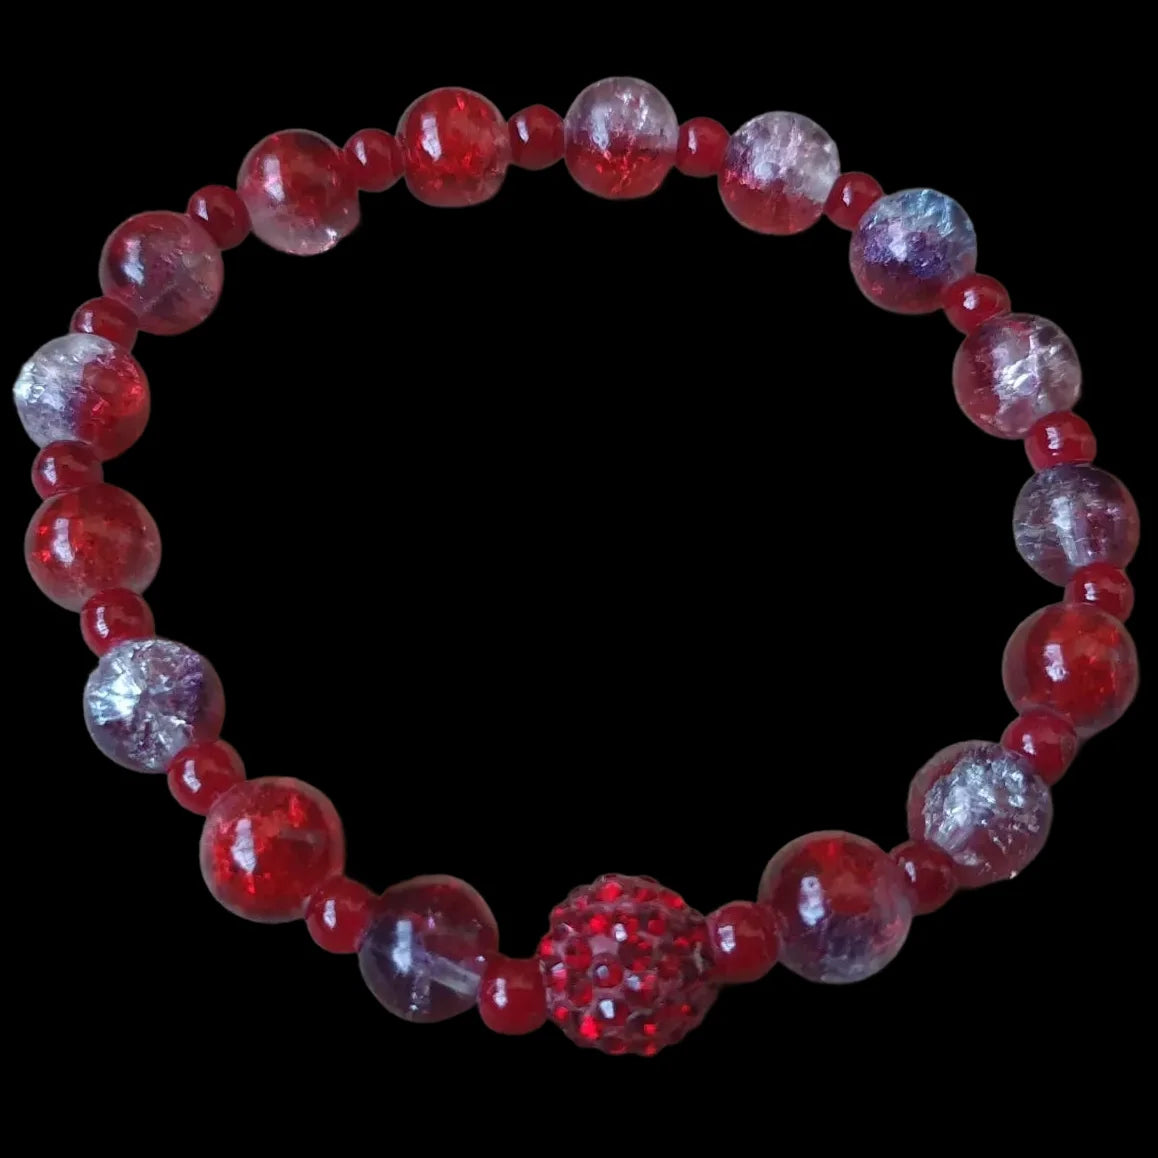 Unique Handmade Crafted Beaded Bracelet Red Gift